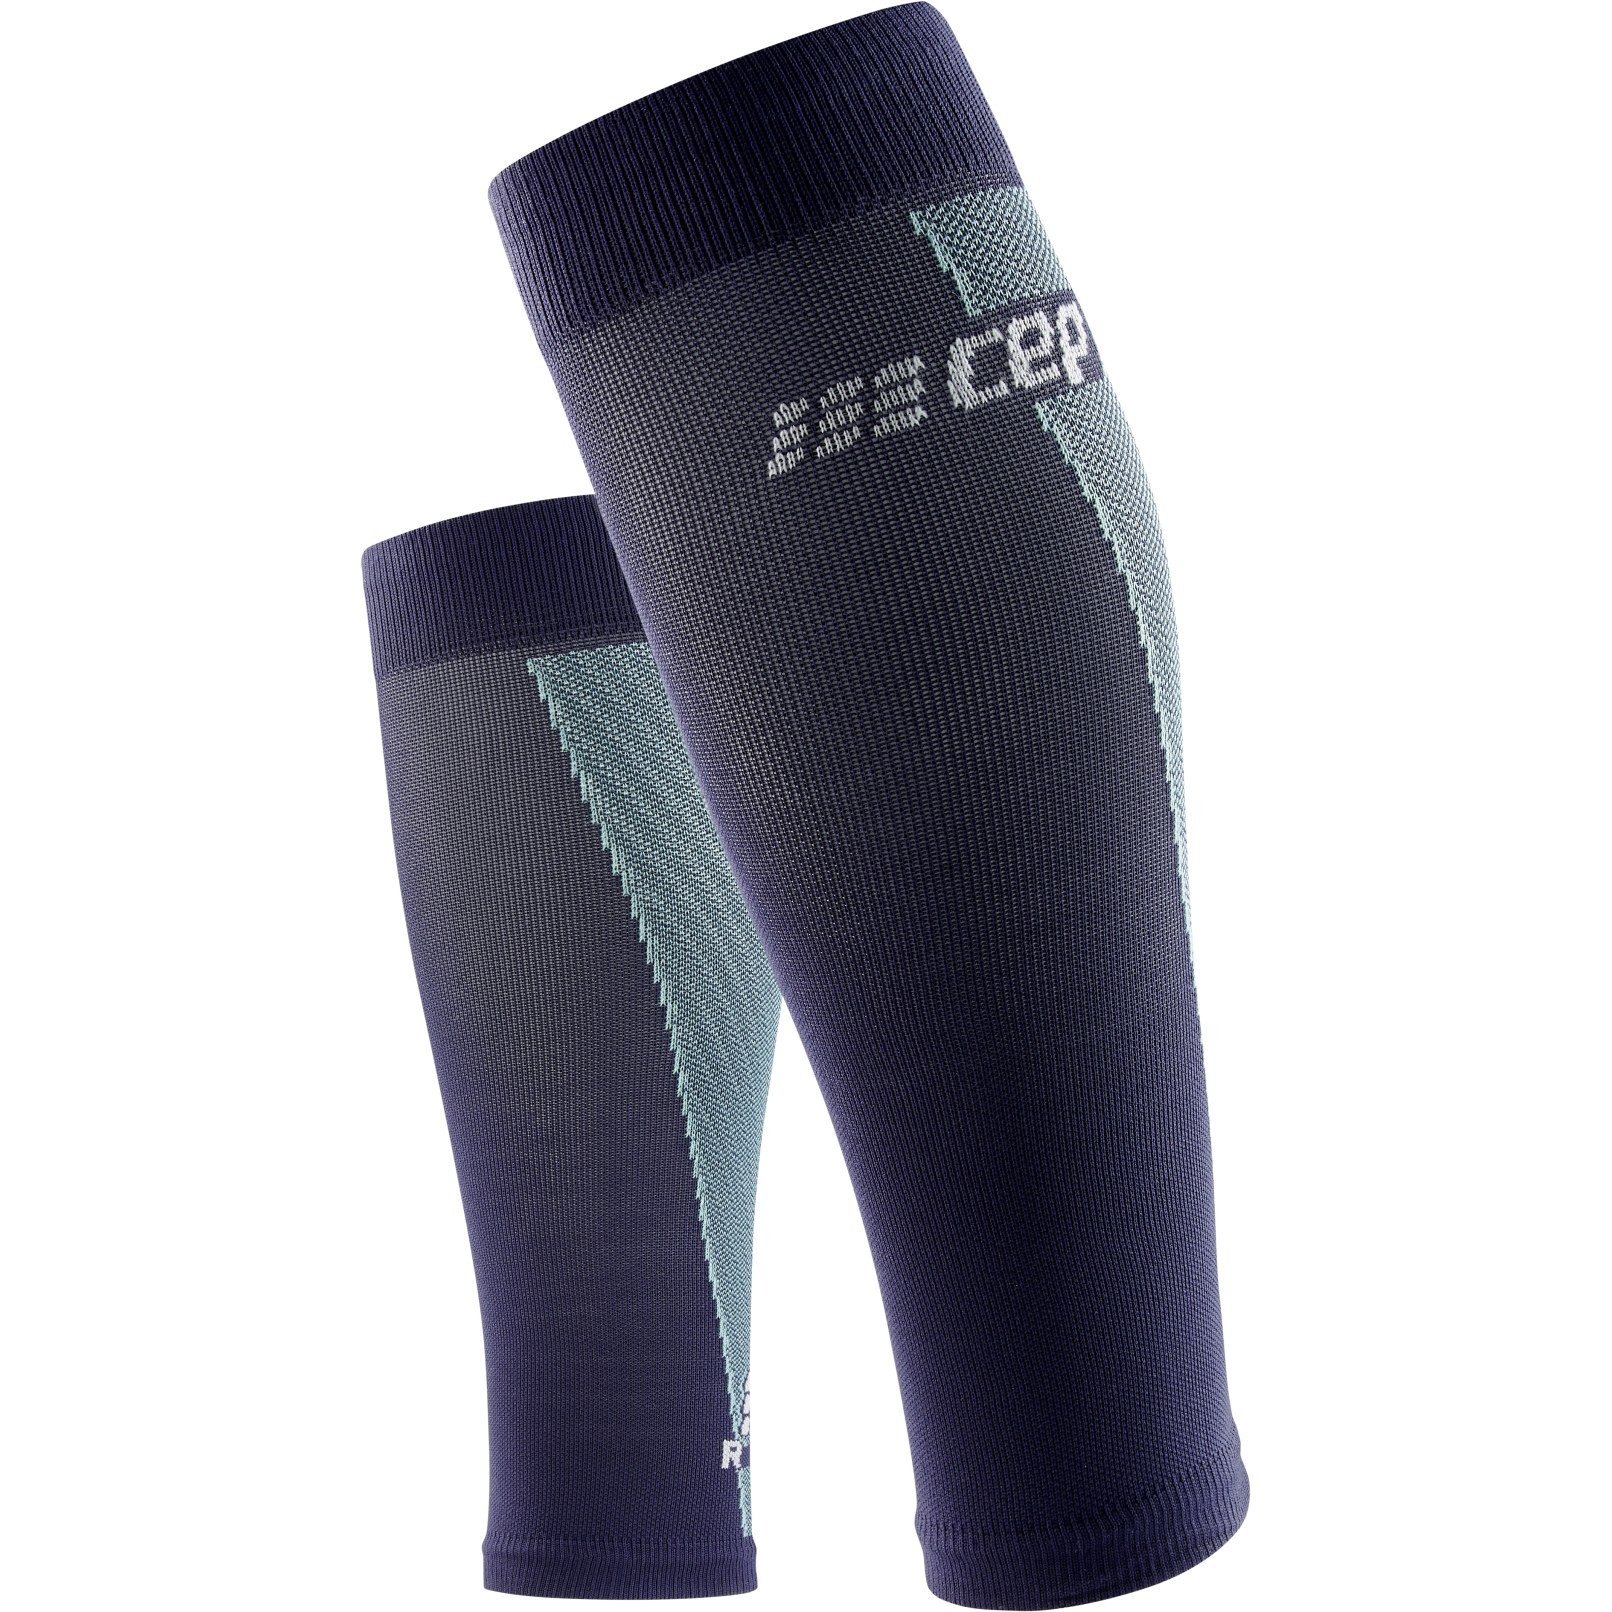 Picture of CEP Ultralight Compression Calf Sleeves V3 Men - blue/light blue